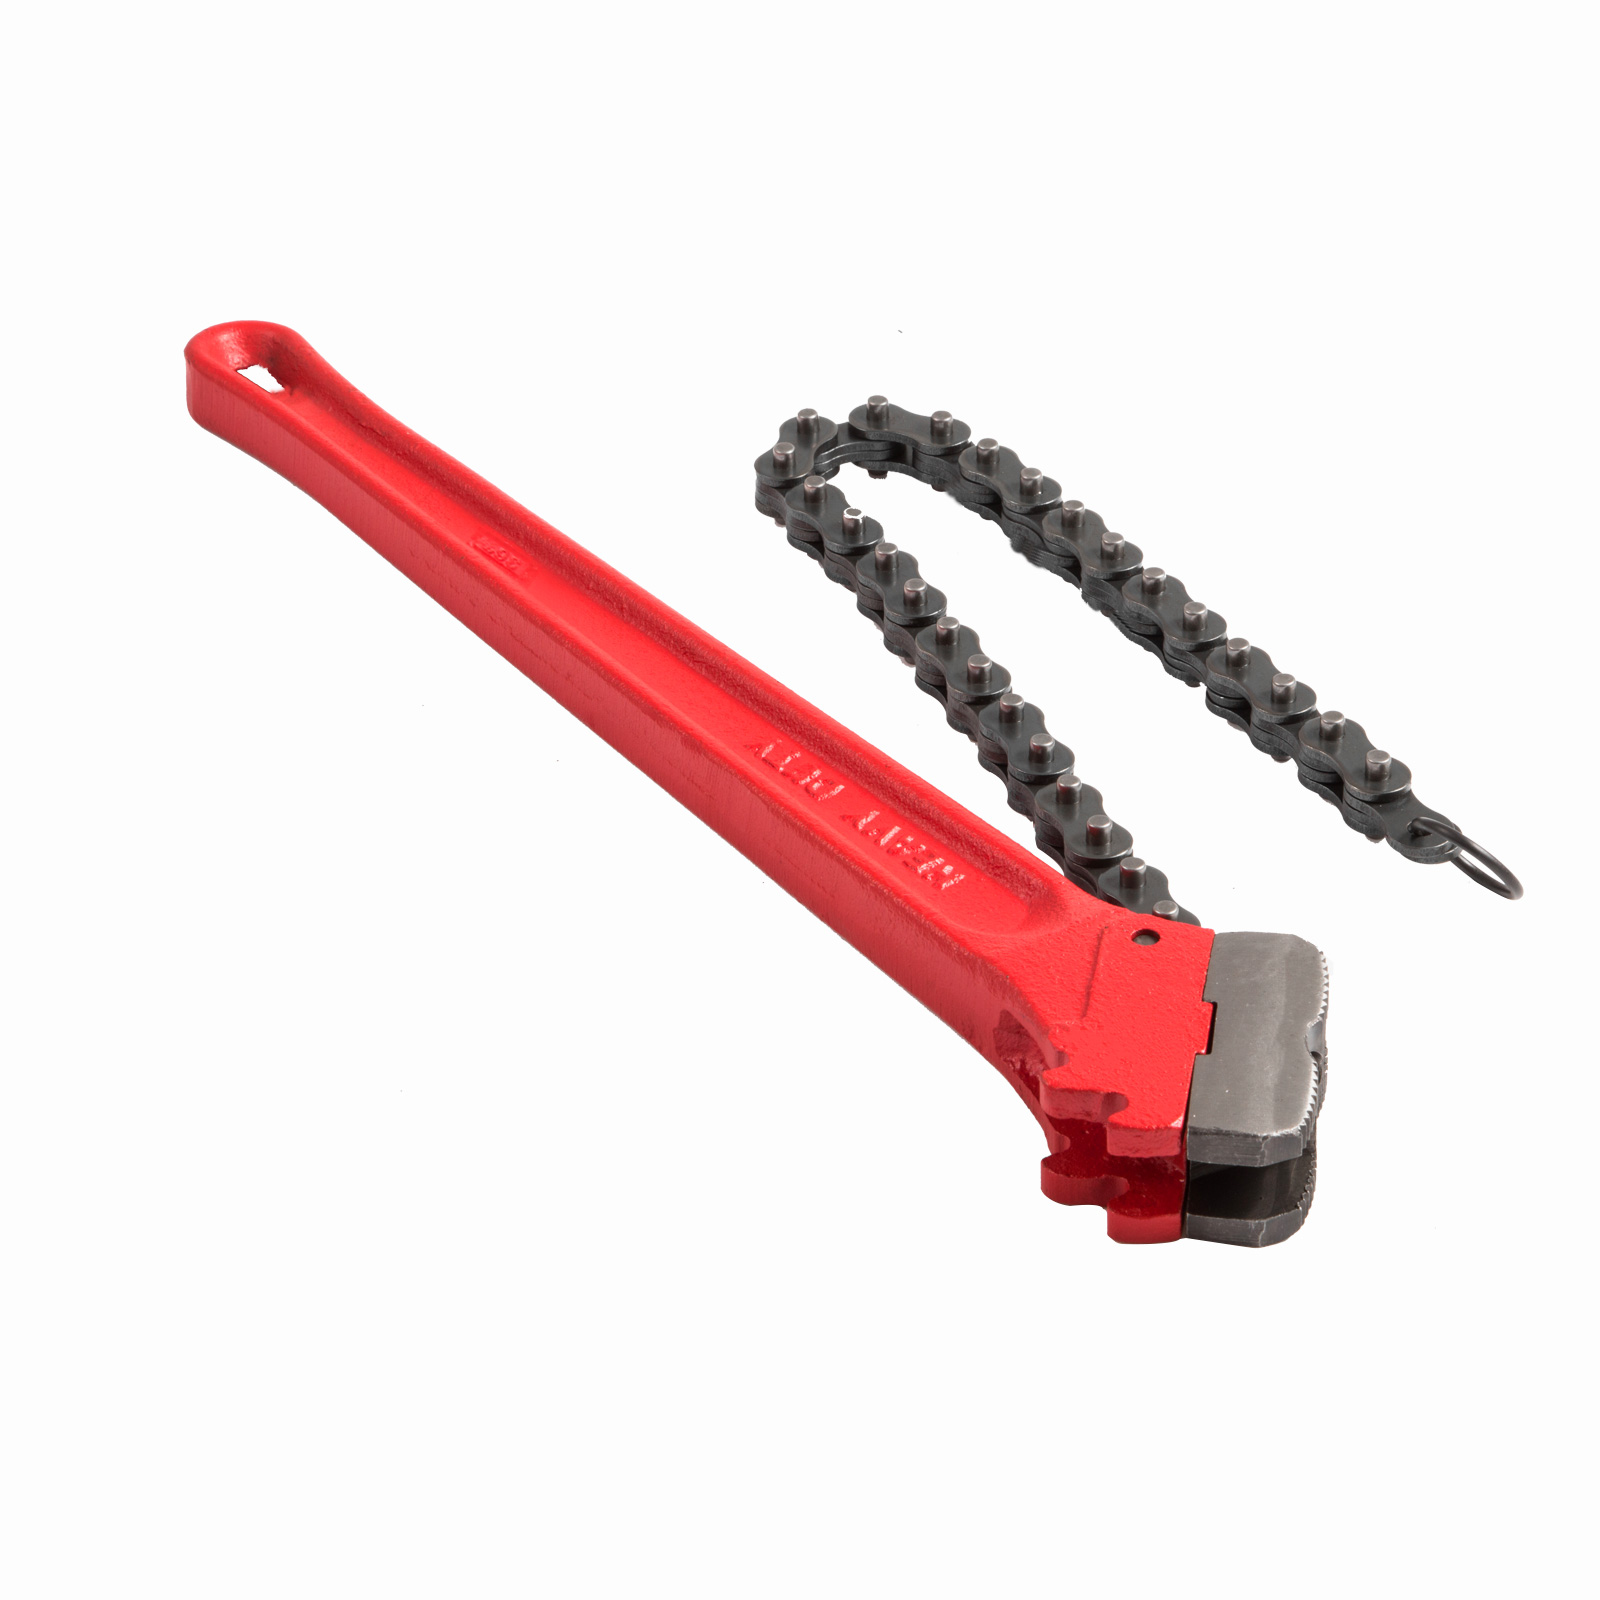 VEVOR 18" Pipe Chain Wrench Steel Ratcheting Wrench 20-1/4" Chain 6" Capacity 